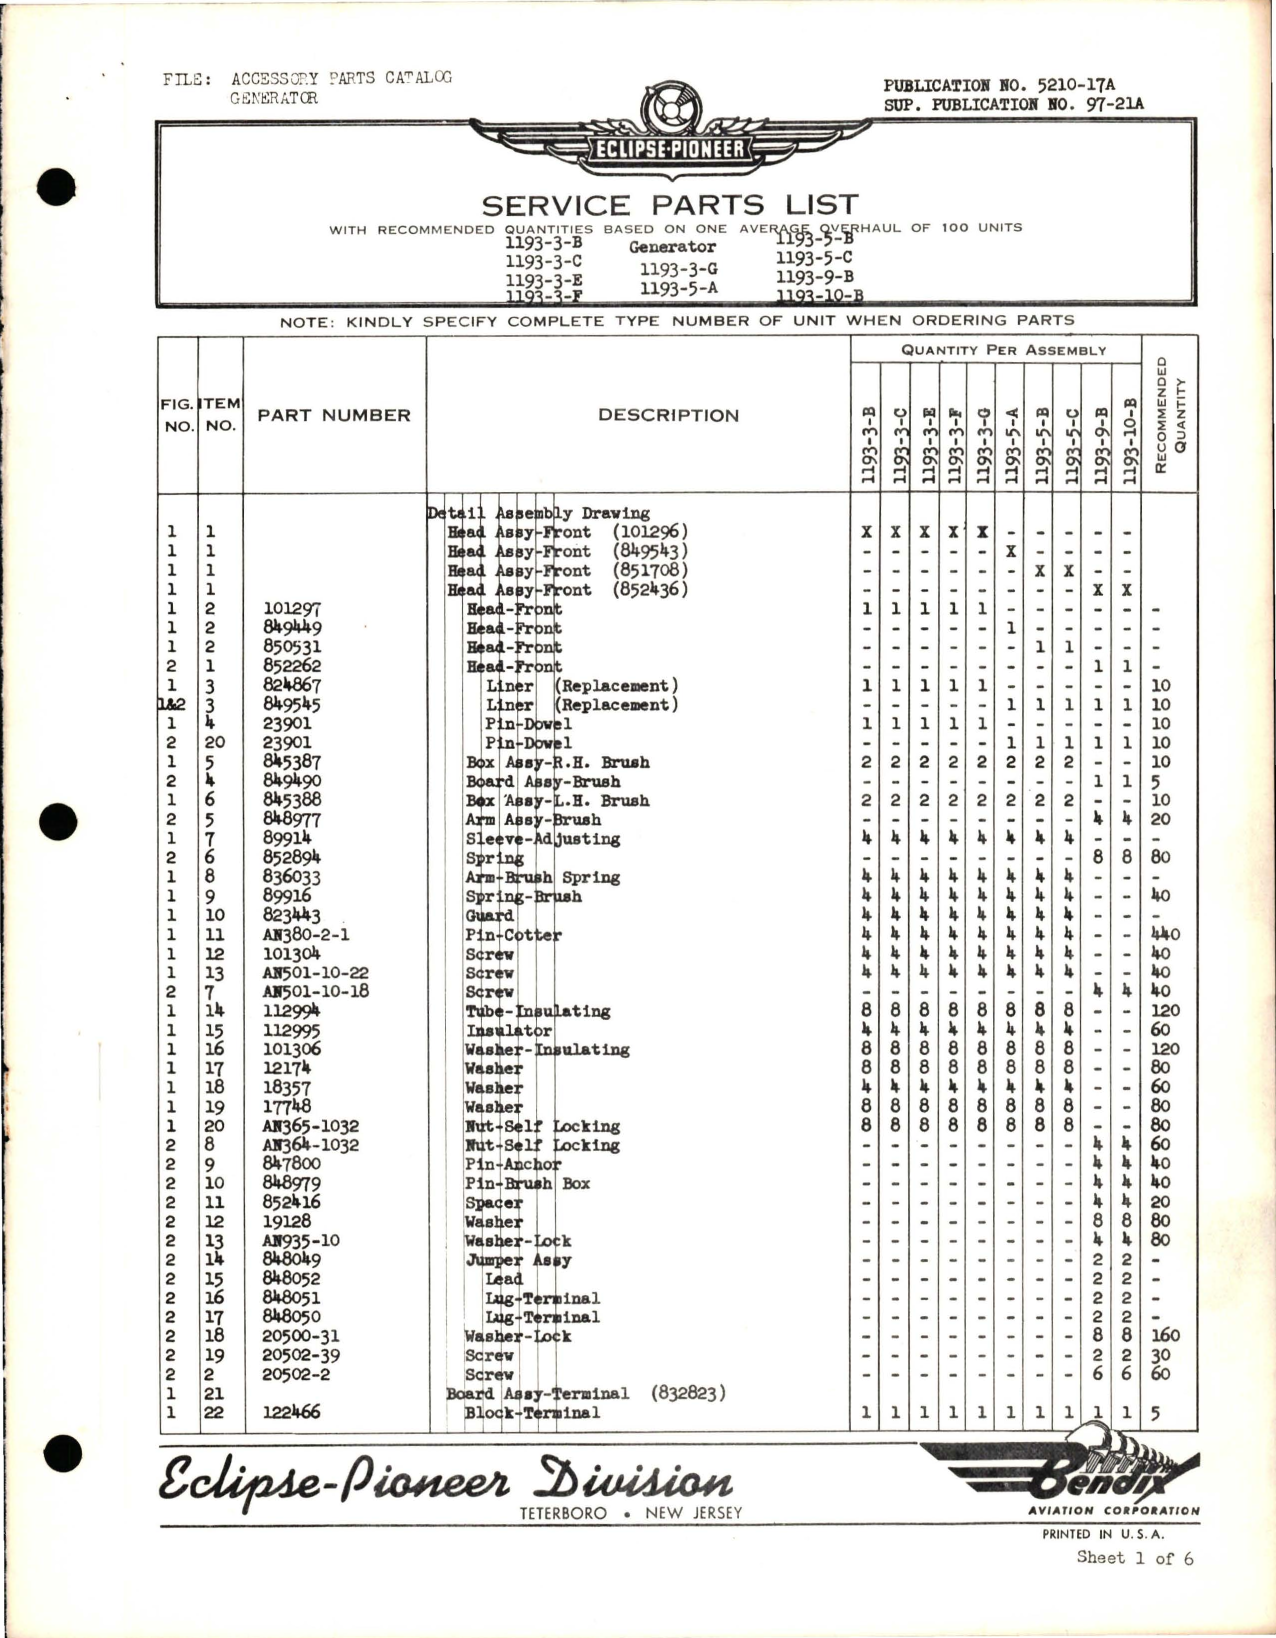 Sample page 1 from AirCorps Library document: Service Parts List for Generators 